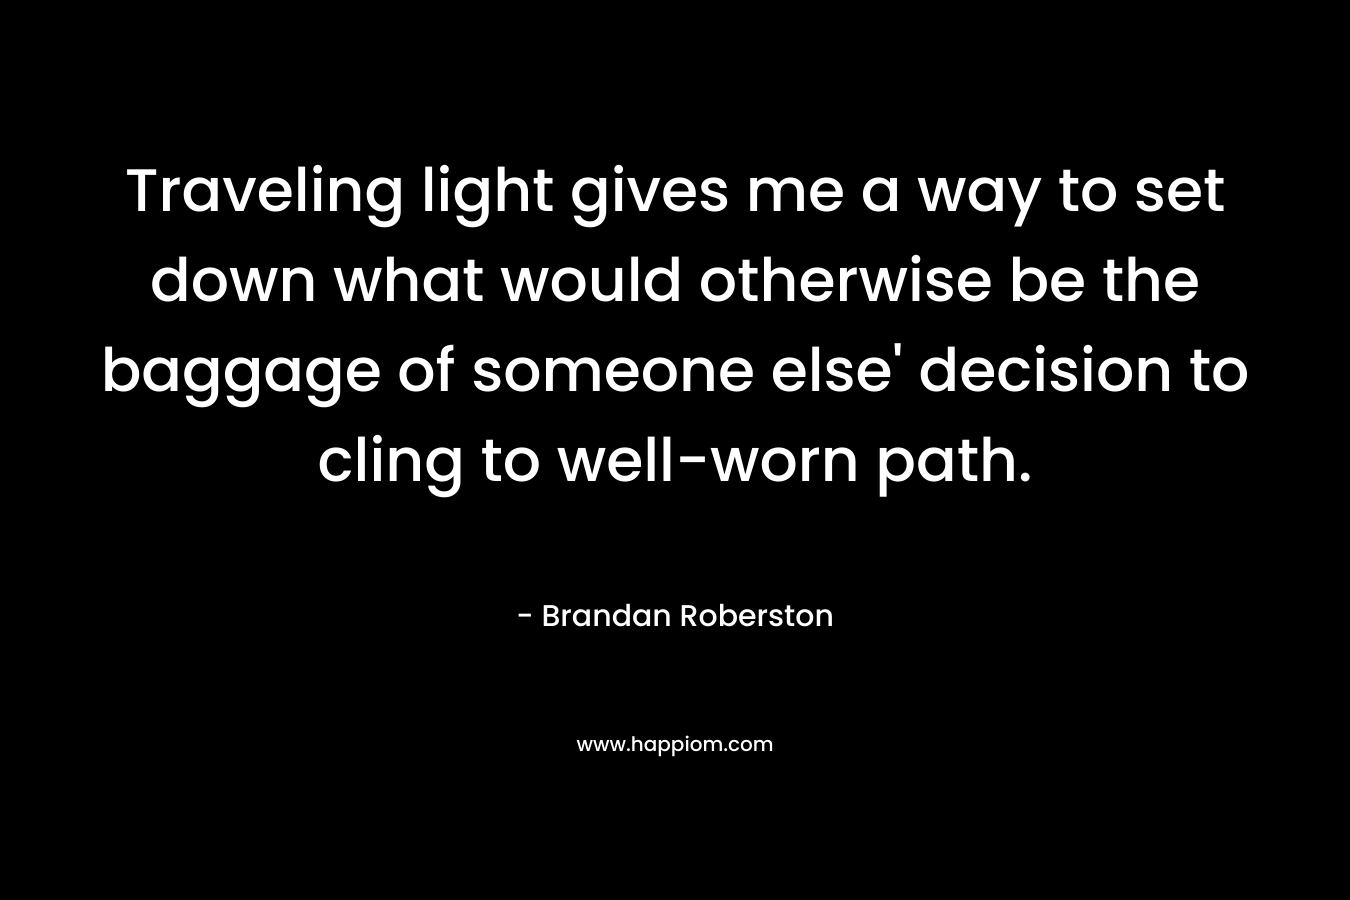 Traveling light gives me a way to set down what would otherwise be the baggage of someone else’ decision to cling to well-worn path. – Brandan Roberston